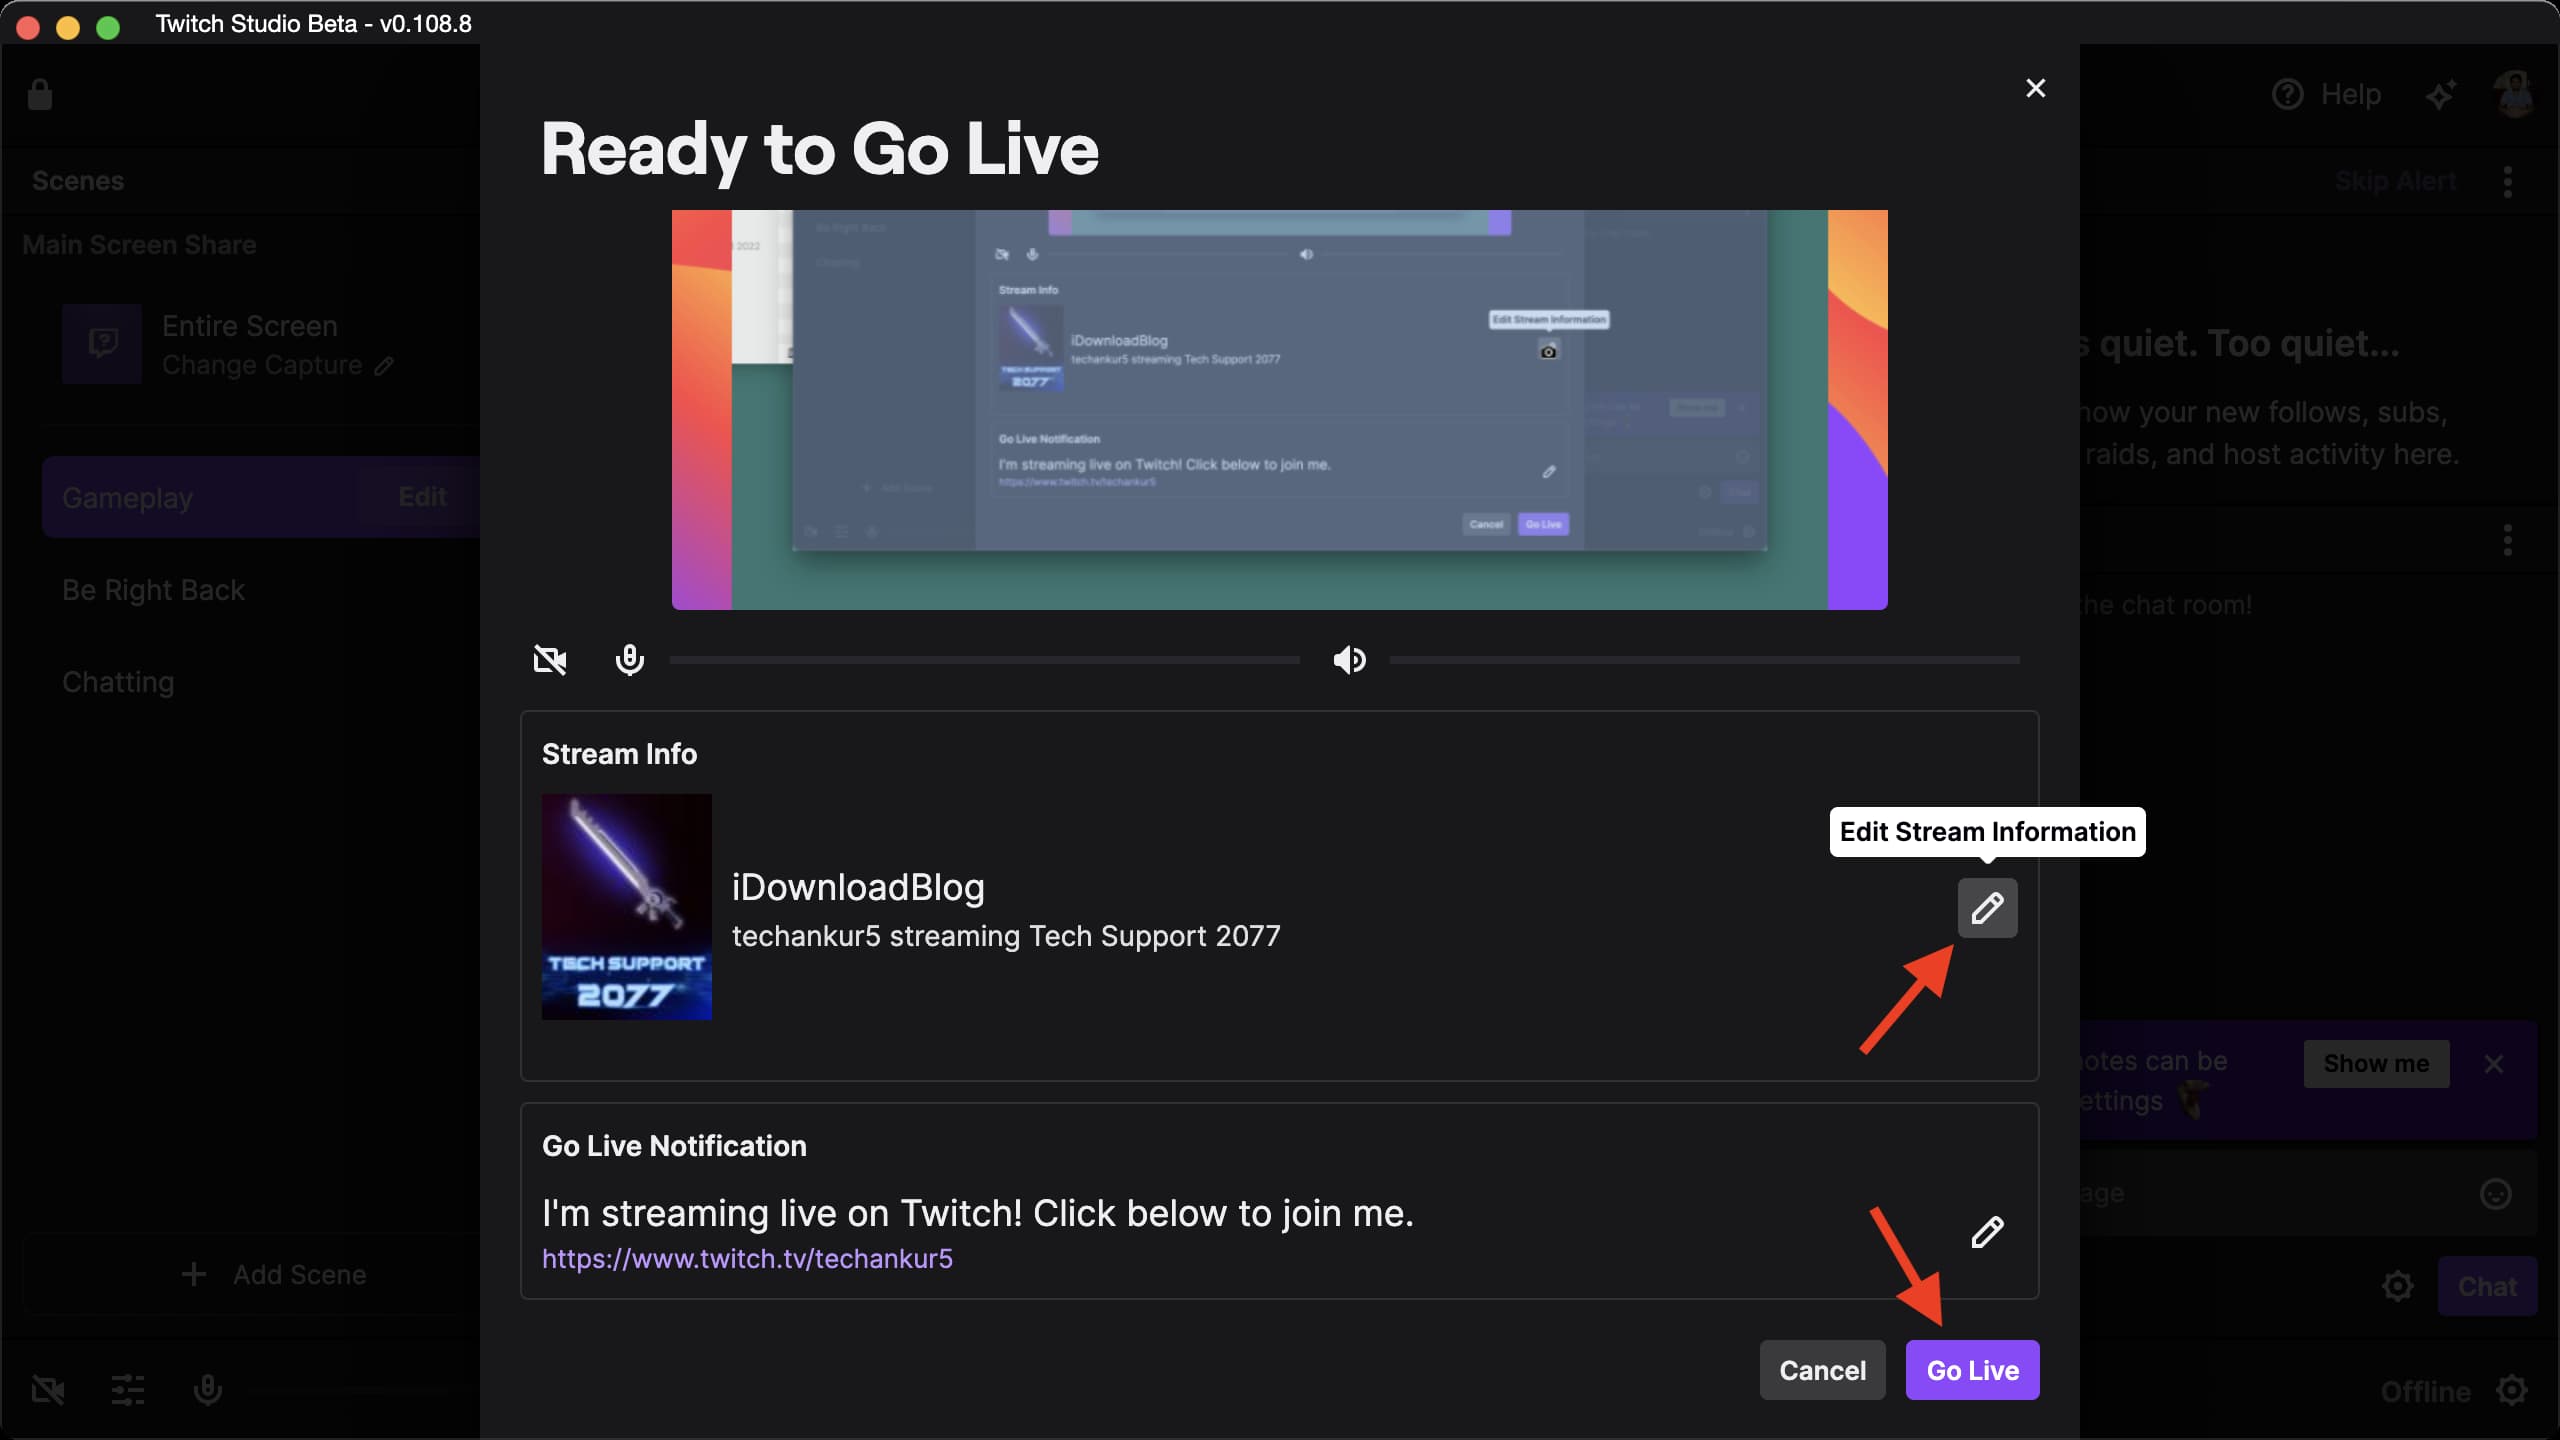 Edit Stream Information and Go Live on Twitch from Mac